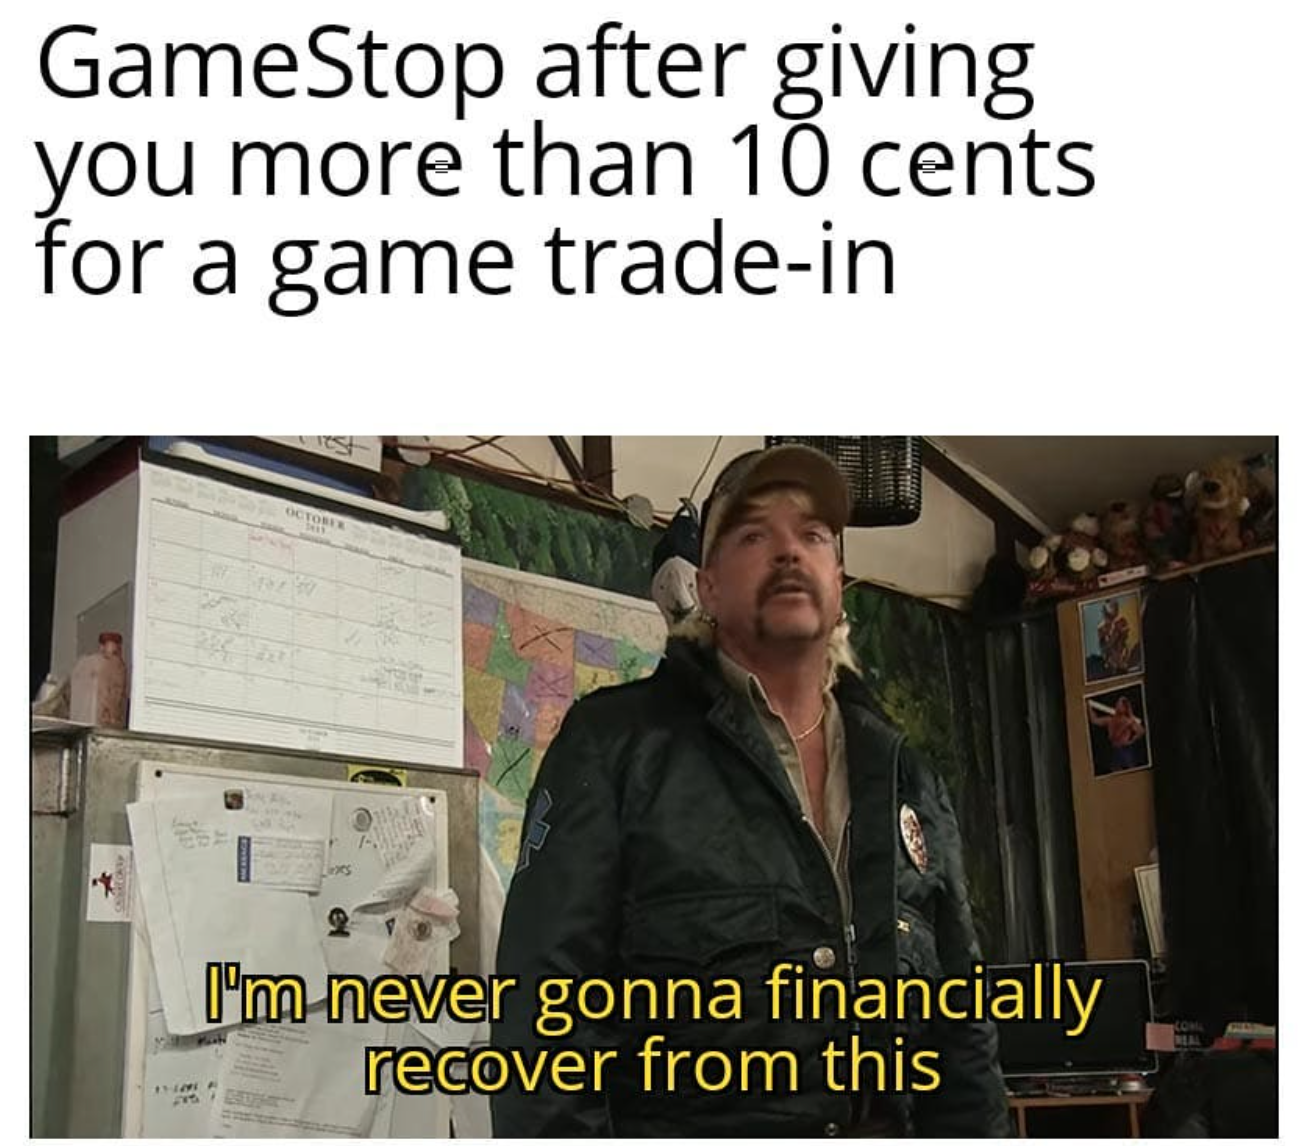 gamestop after giving you more than 10 cents for a game trade-in. I'm never gonna financially recover from this. tiger king meme.